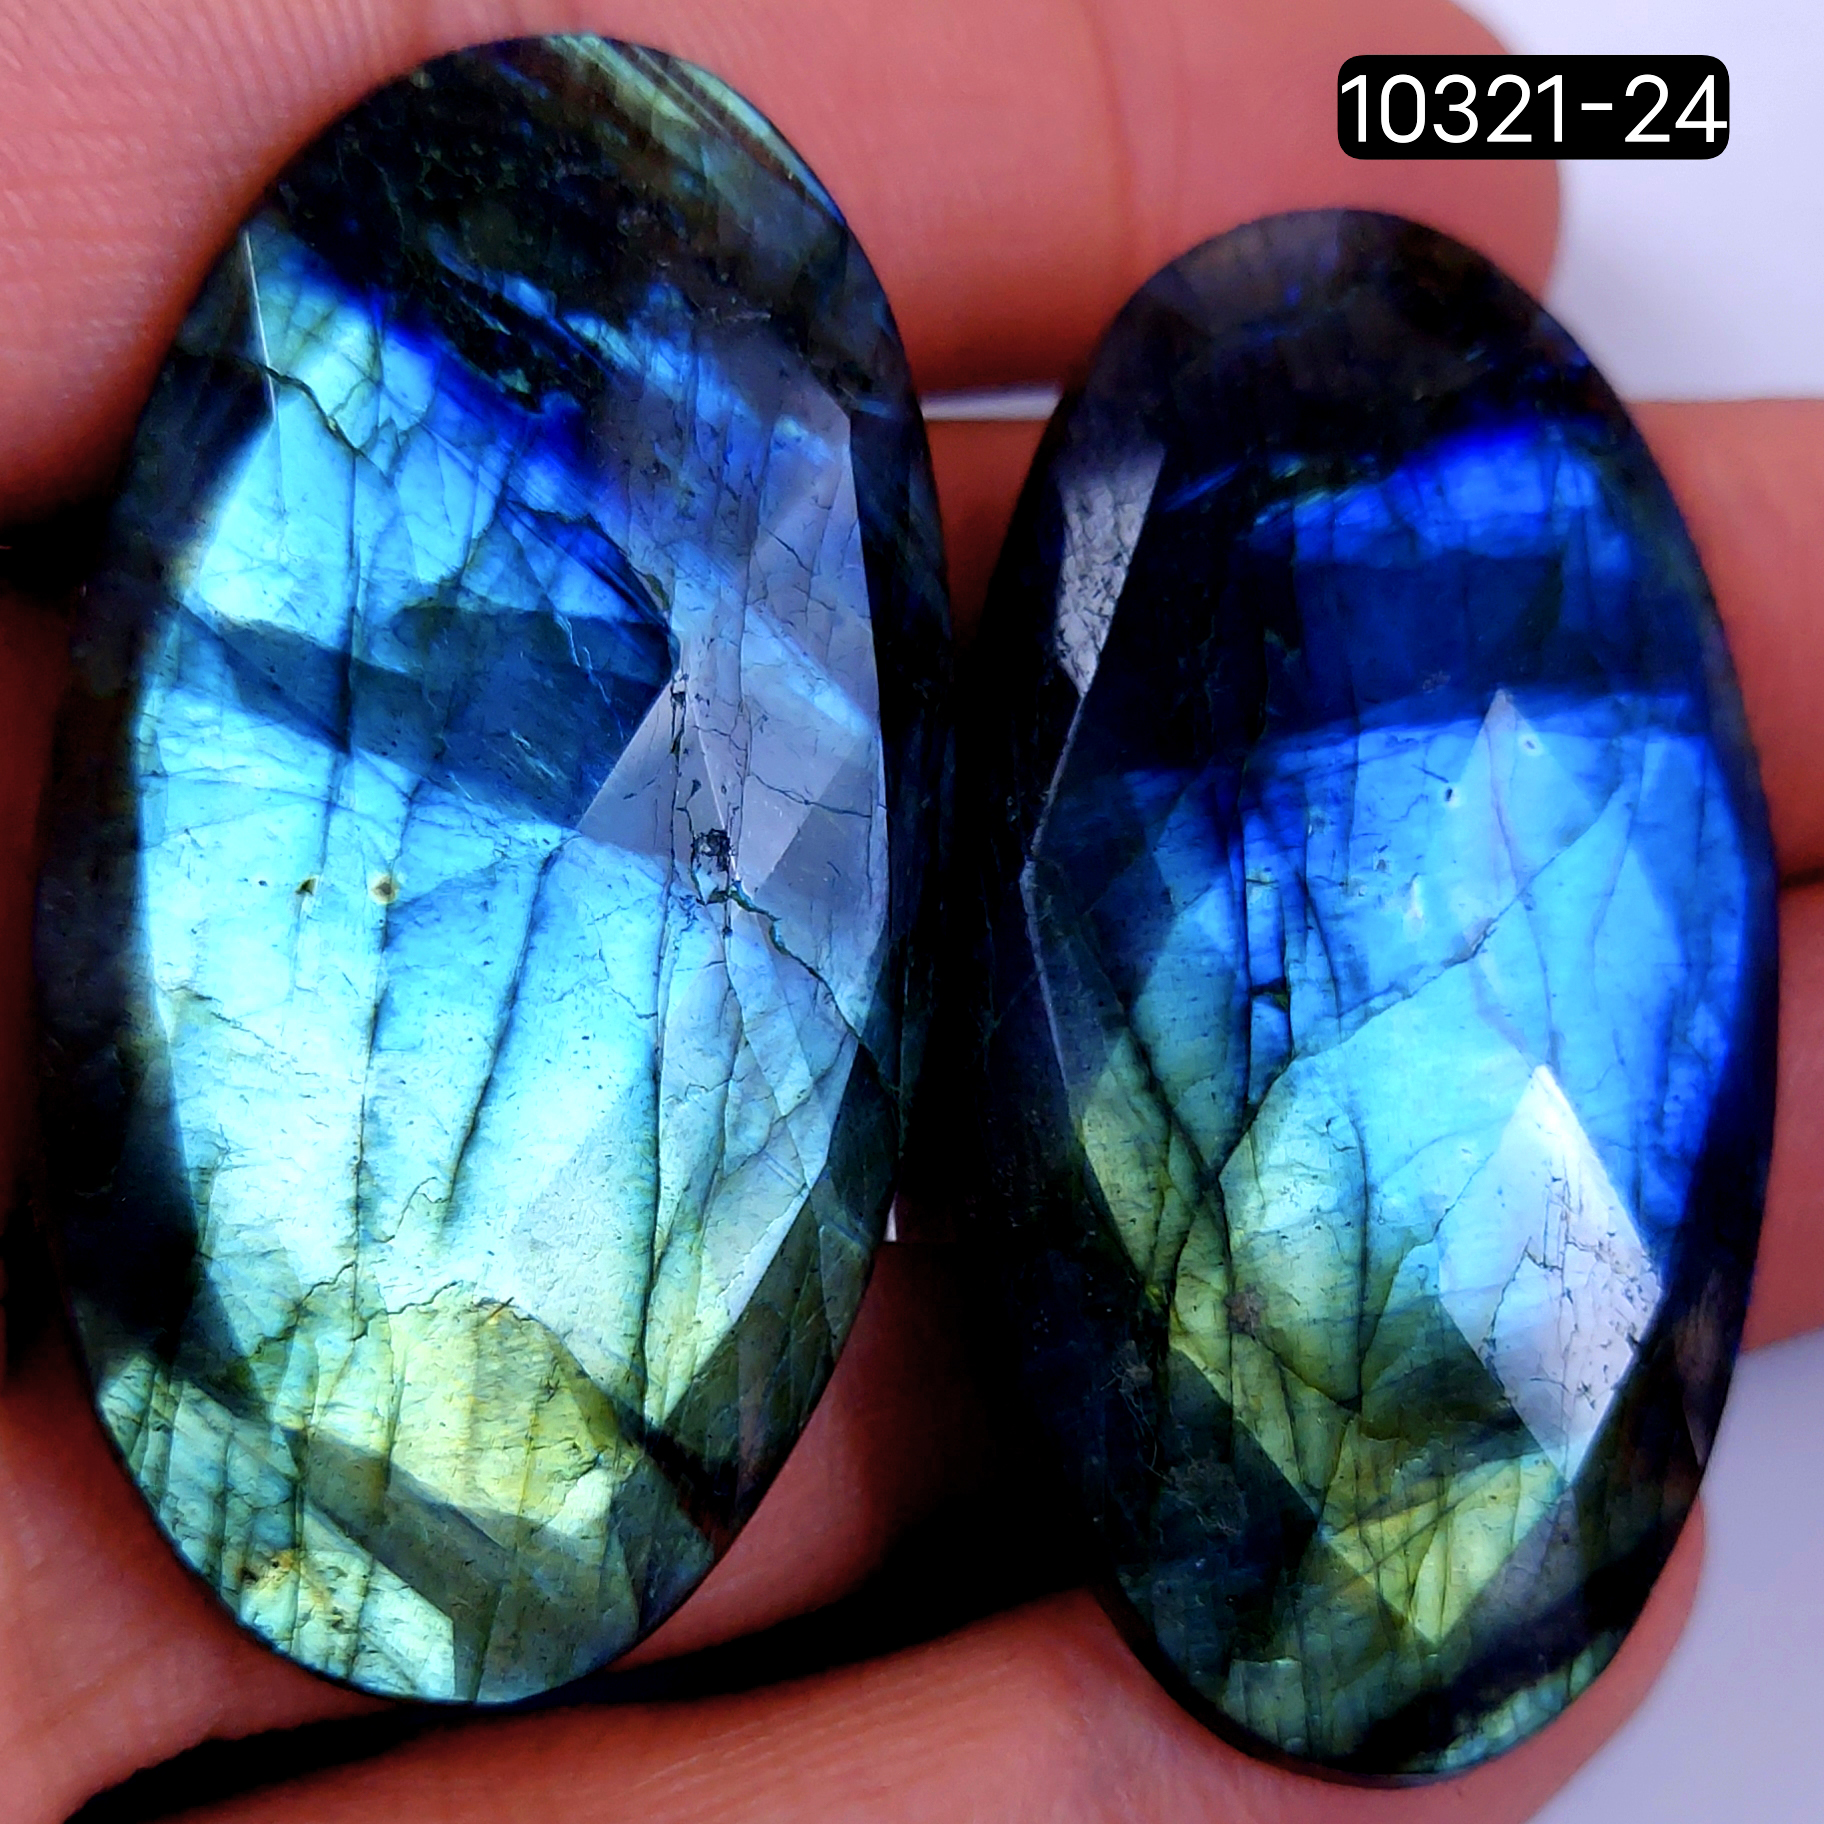 129Cts Natural Labradorite Faceted Cabochon Pair Polished Loose Gemstone Flat Back Multi Jewelry Making Crystal  48x26mm #10321-24